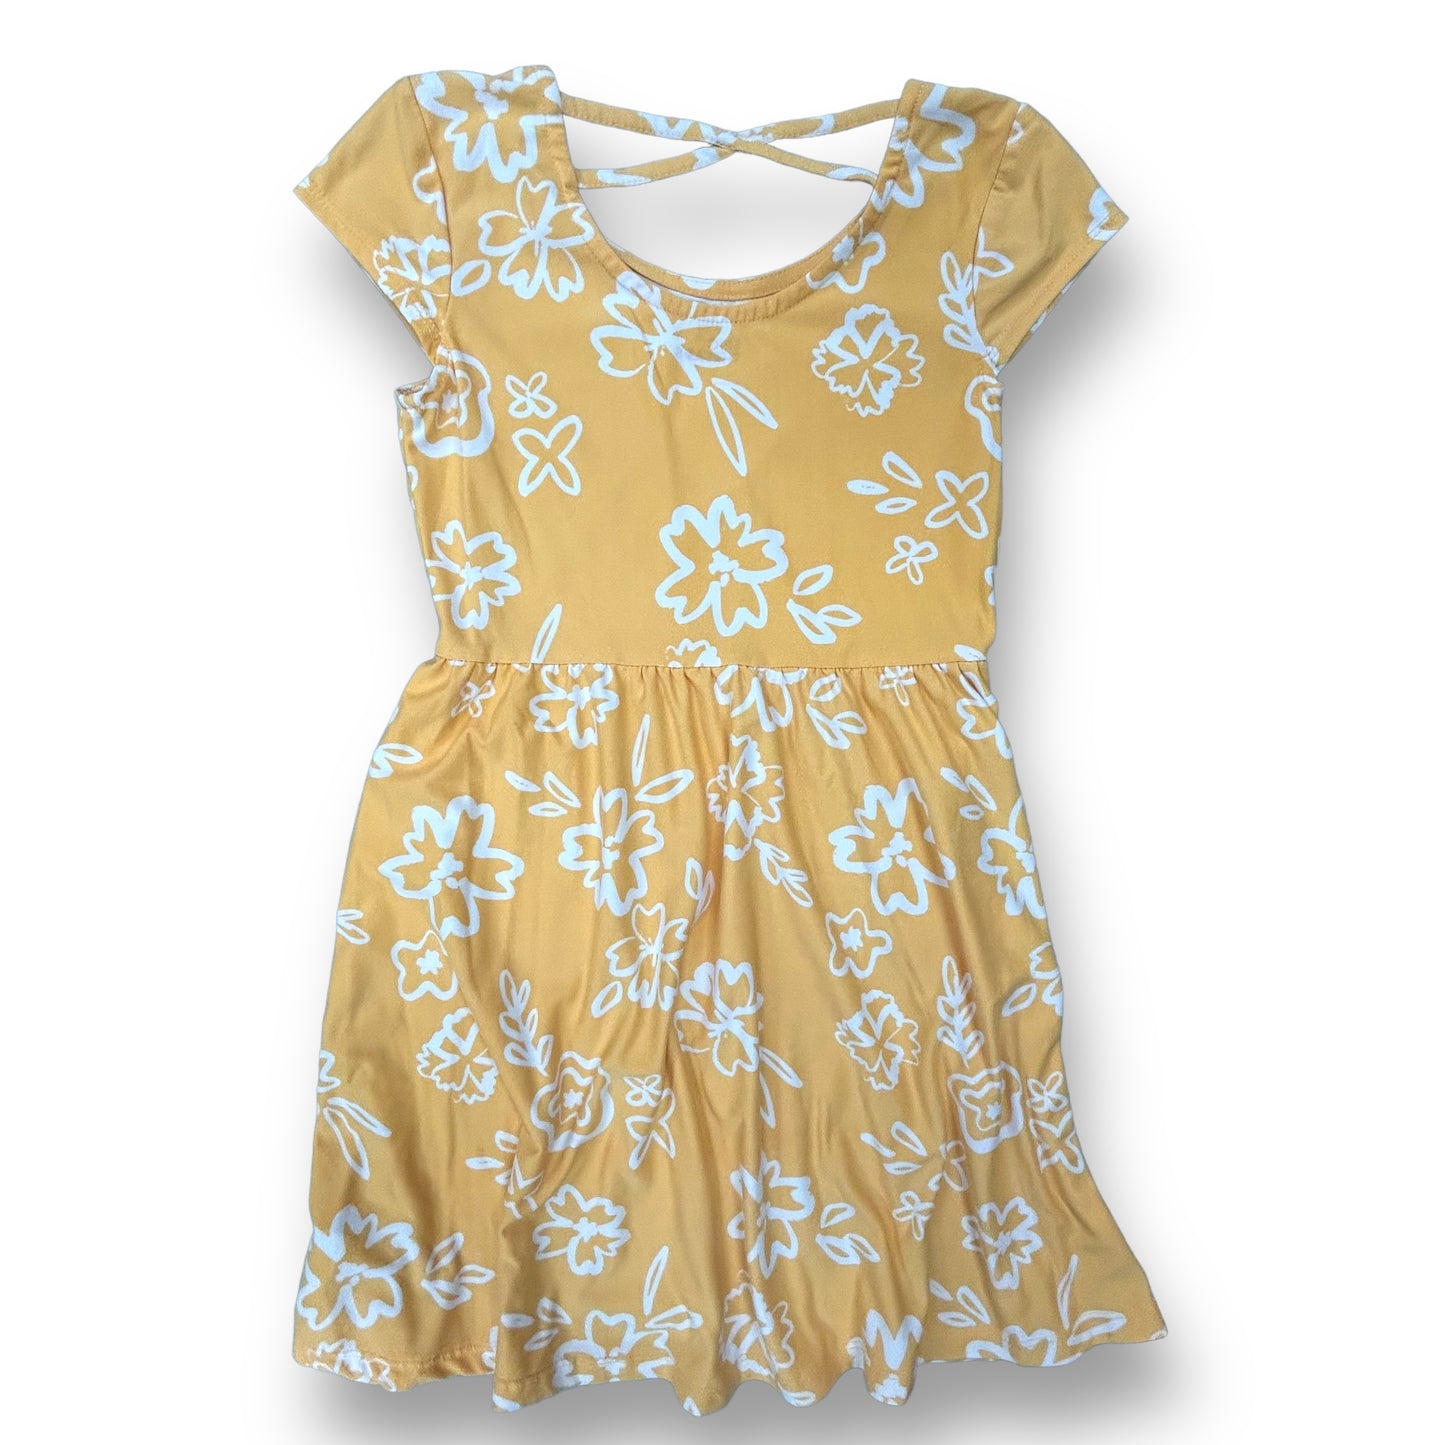 Girls Epic Threads Size M White & Yellow Floral Soft Short Sleeve Dress